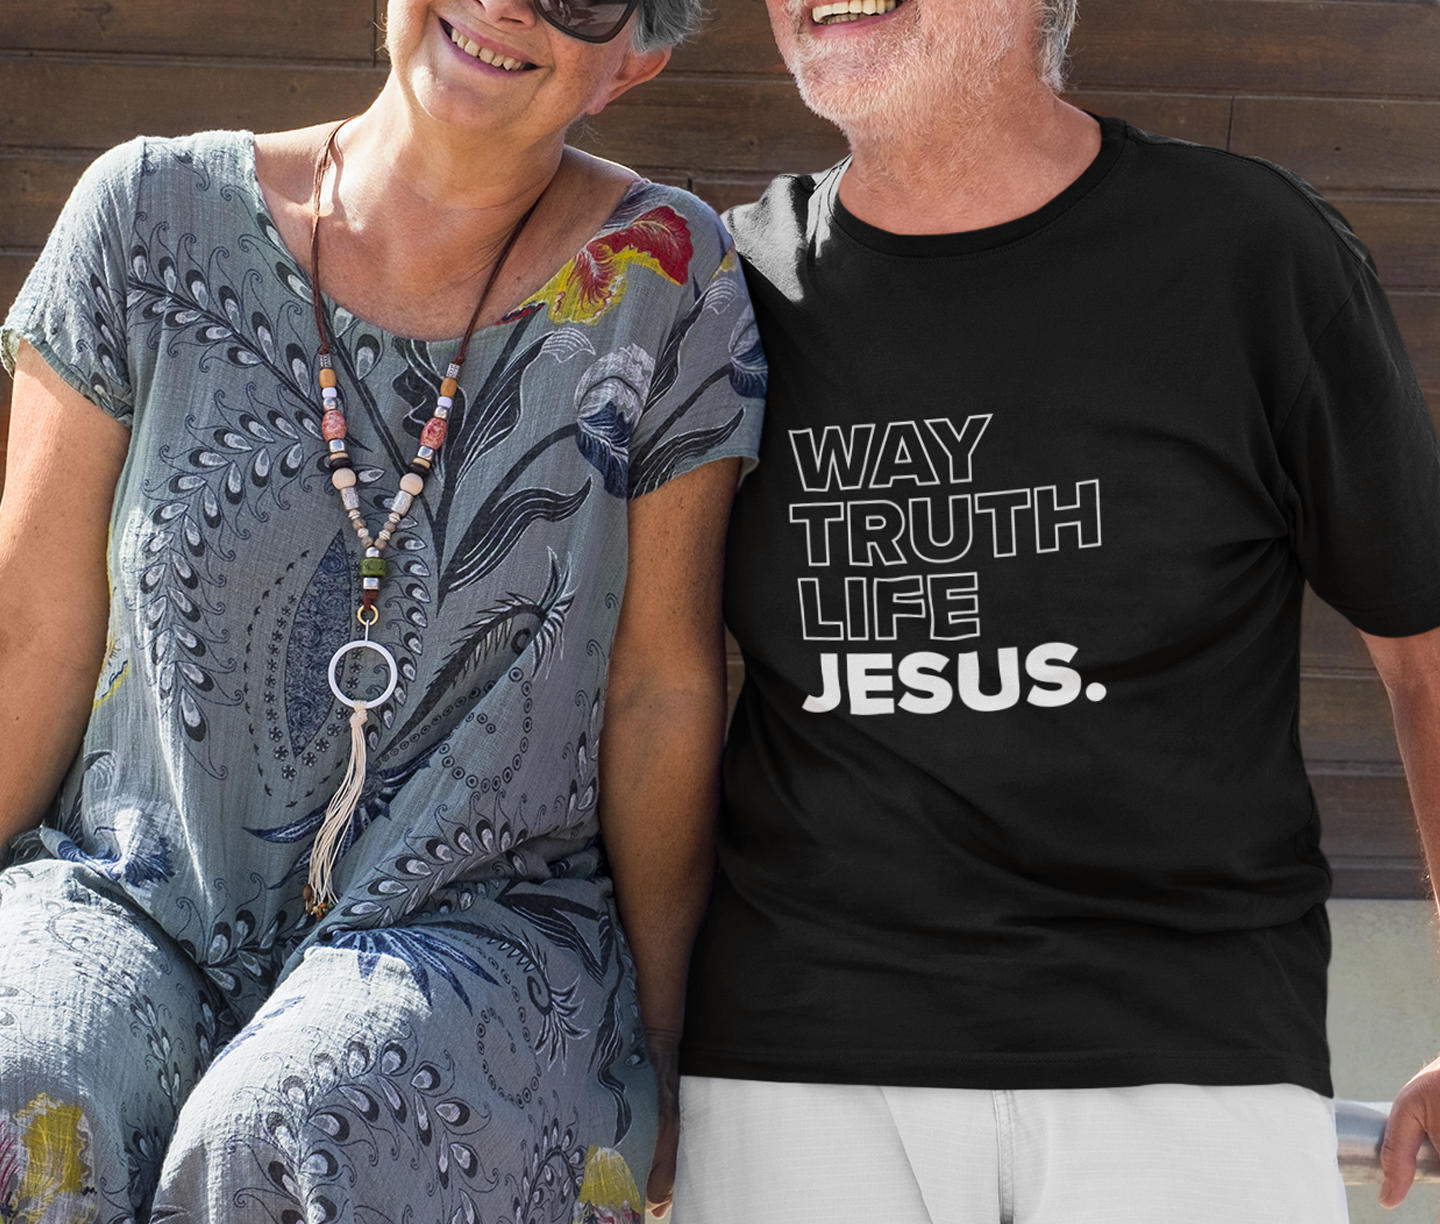 JESUS WAY TRUTH LIFE FRONT - CHRISTIAN T-SHIRT